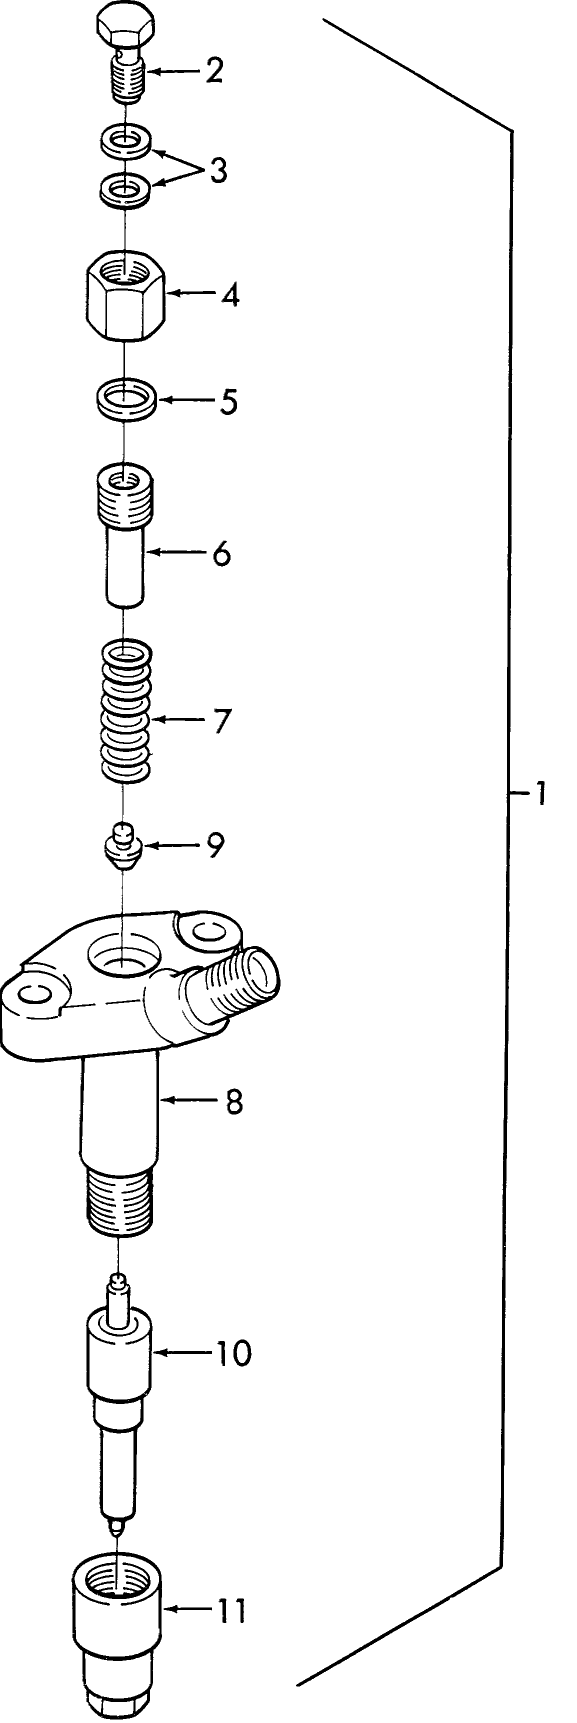 09C01 FUEL INJECTOR ASSEMBLY